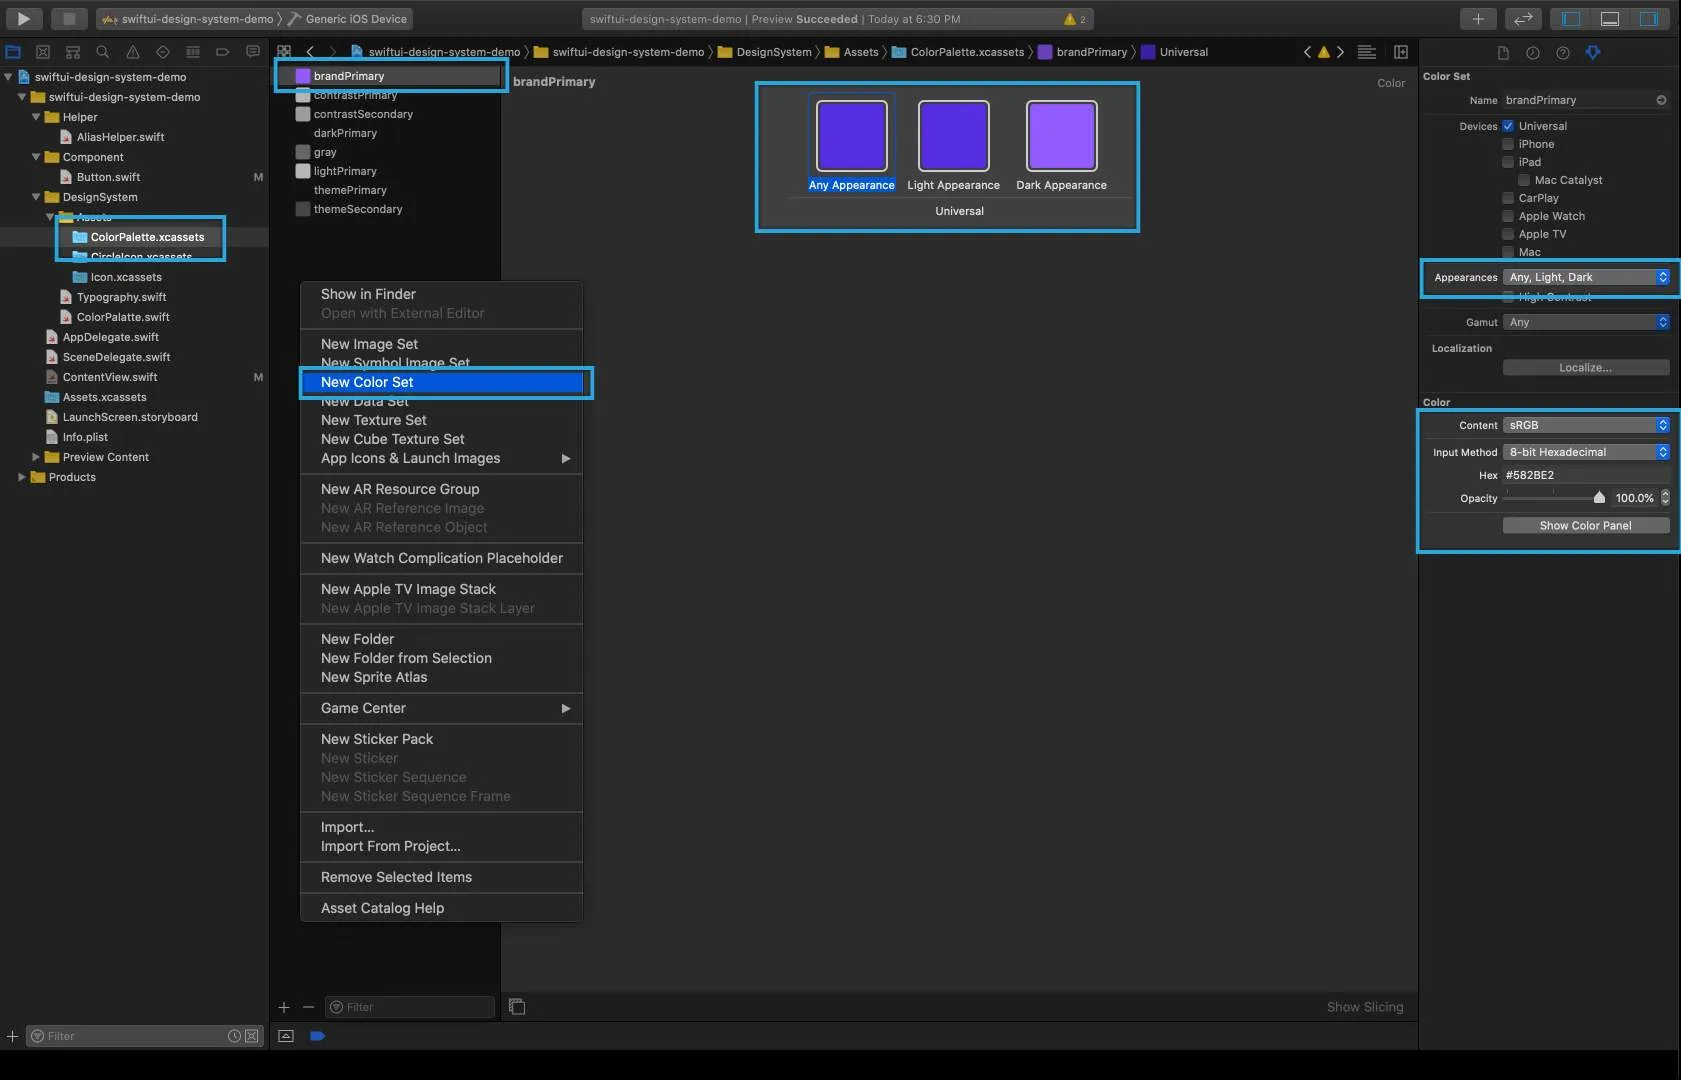 How to add color asset in Xcode